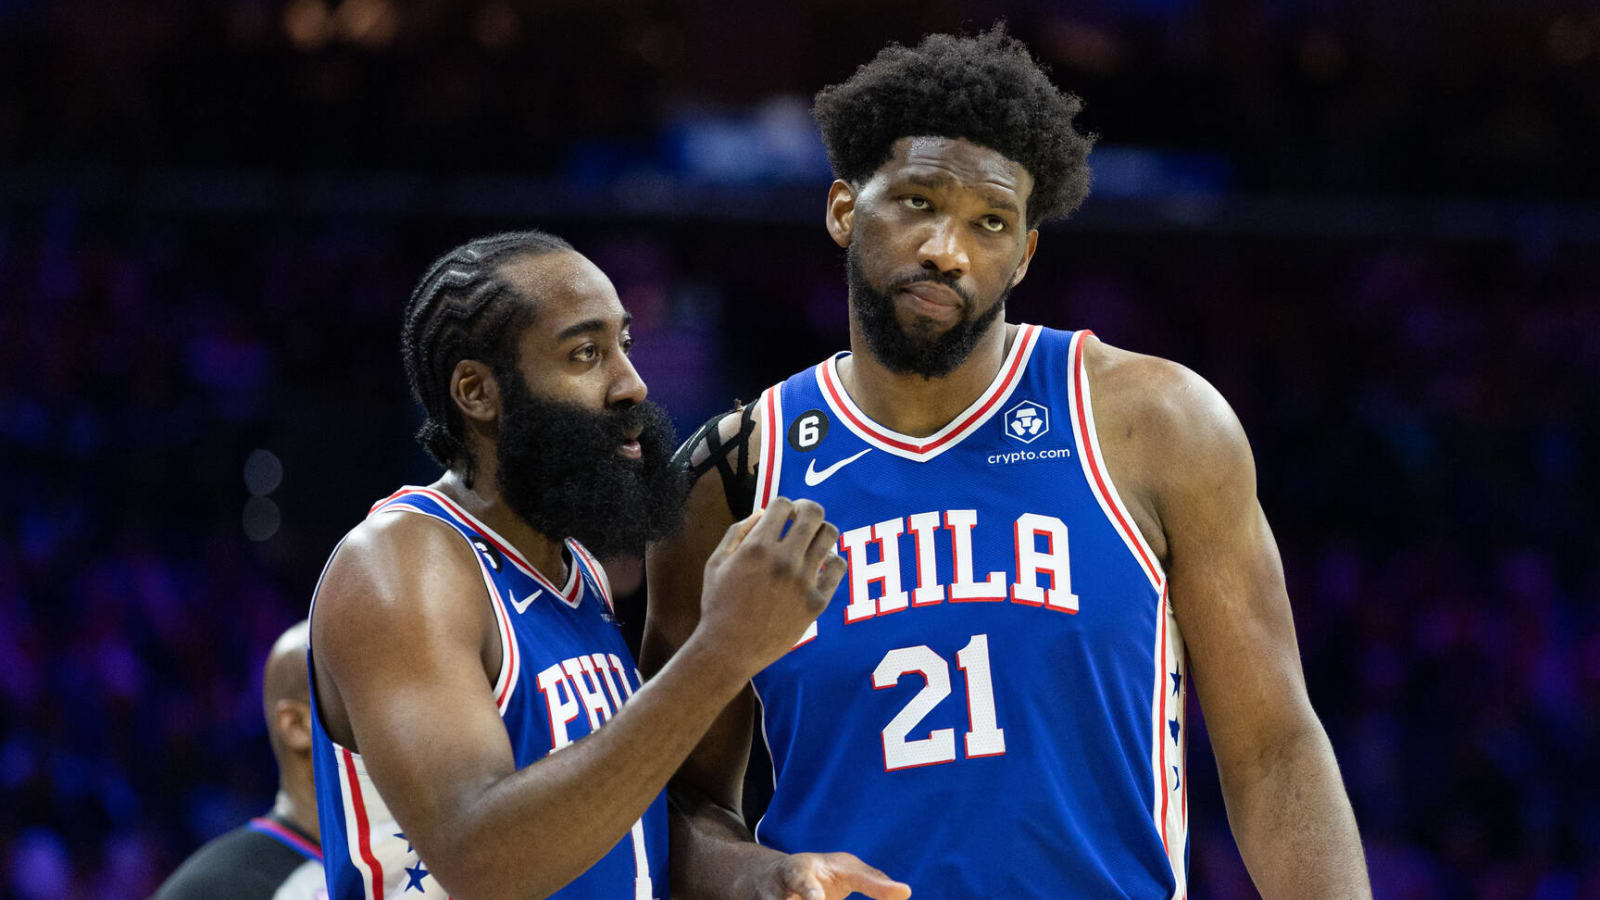 Report reveals what Joel Embiid told 76ers about James Harden drama